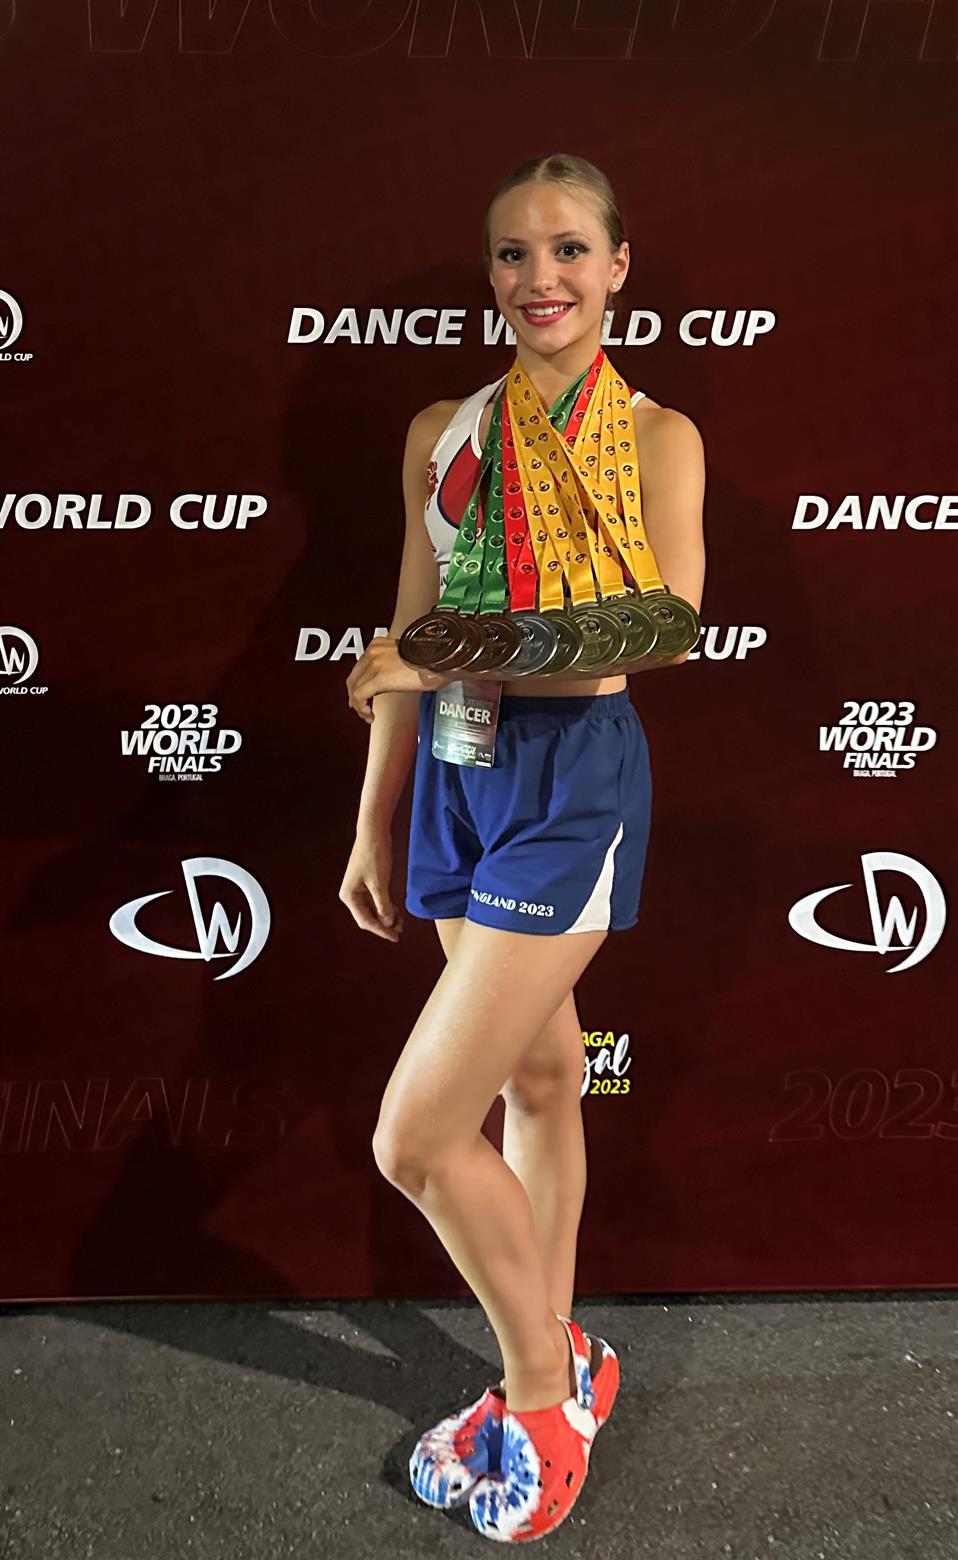 Golds for Gracie at the 2023 Dance World Cup Finals